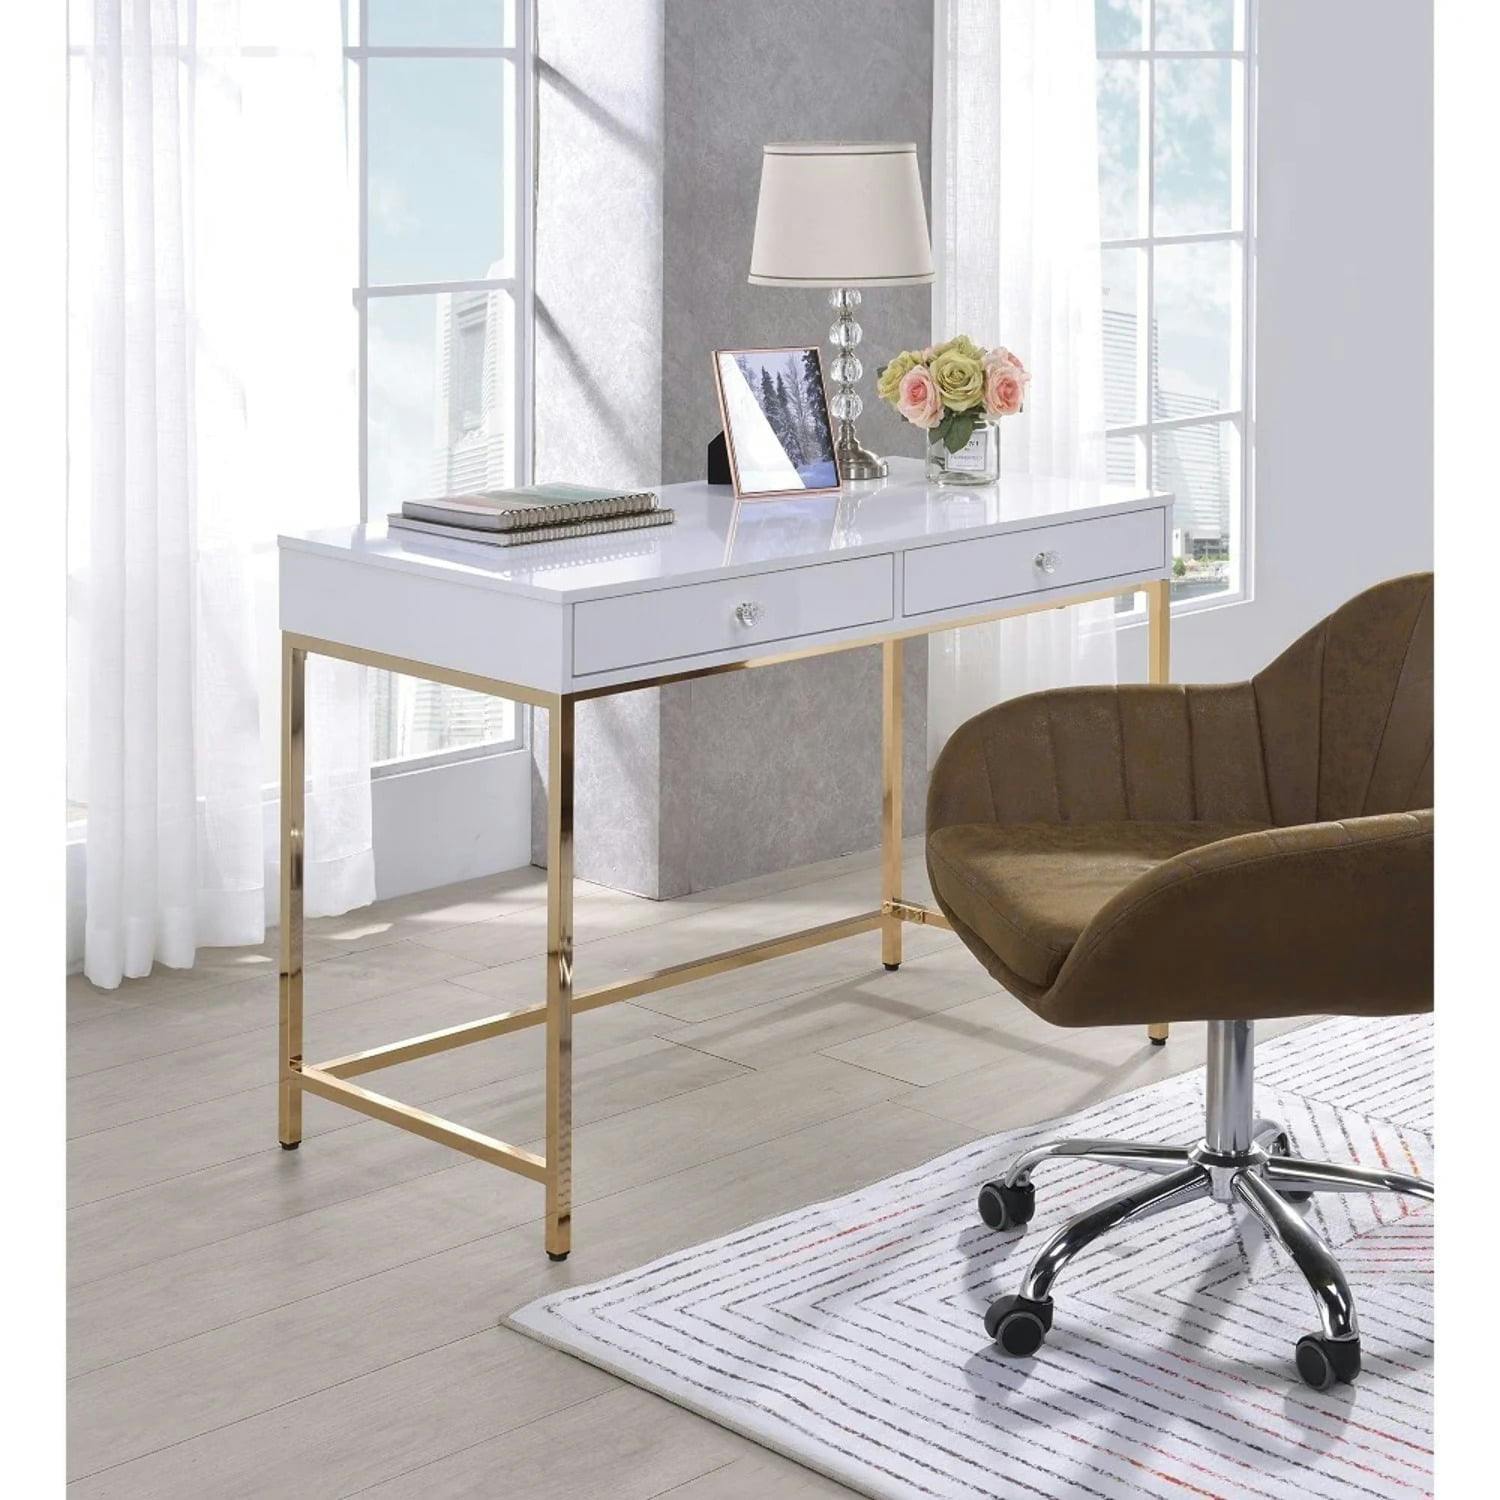 Contemporary White High Gloss 52" Office Desk with Gold Accents